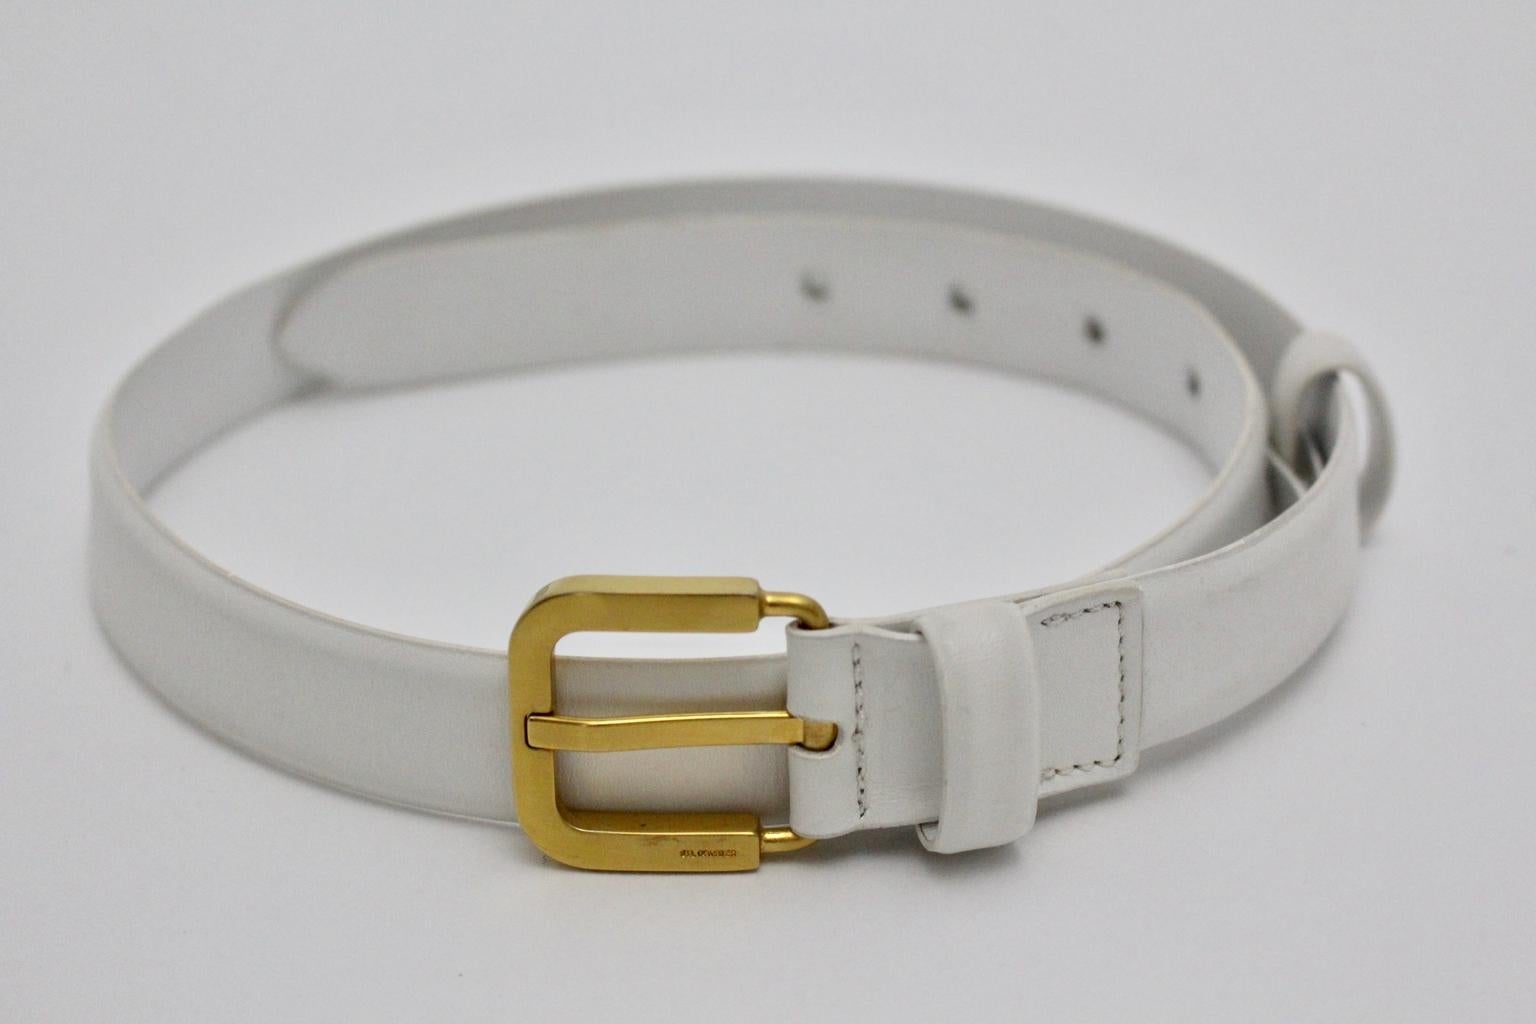 This presented leather belt was designed by Jil Sander in the 1990s.
The clean style belt was made of an engraved leather belt with a belt buckle. Furthermore the belt buckle was made of brass and shows also the engraved label by Jil Sander.
The